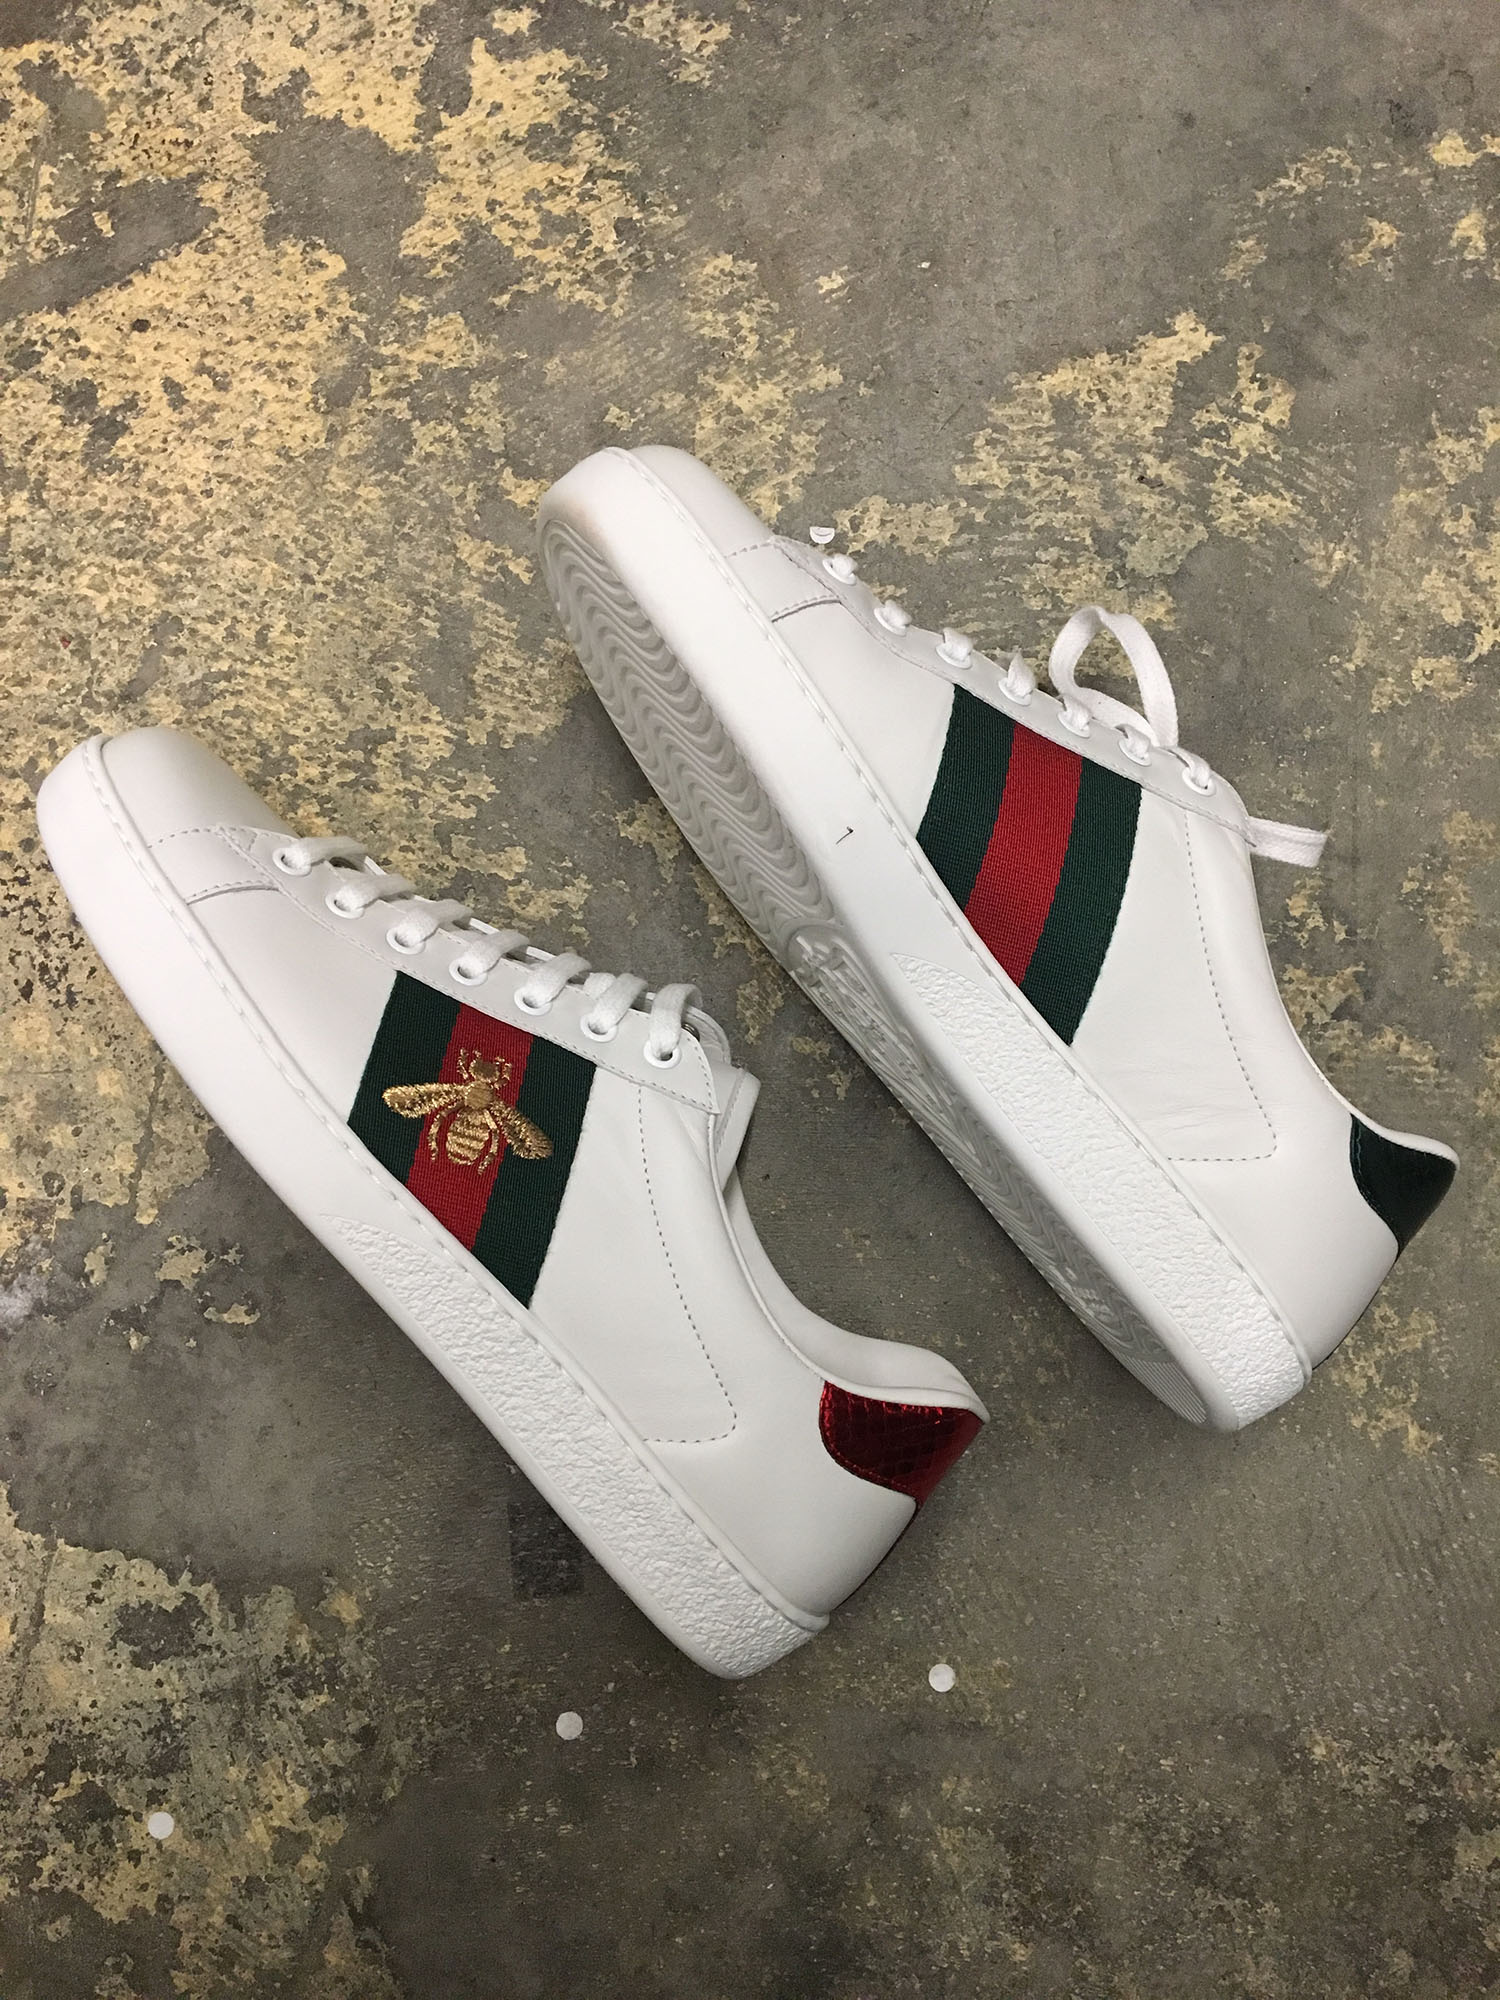 Loading  Stylish mens outfits, Mens tops fashion, Gucci ace sneakers